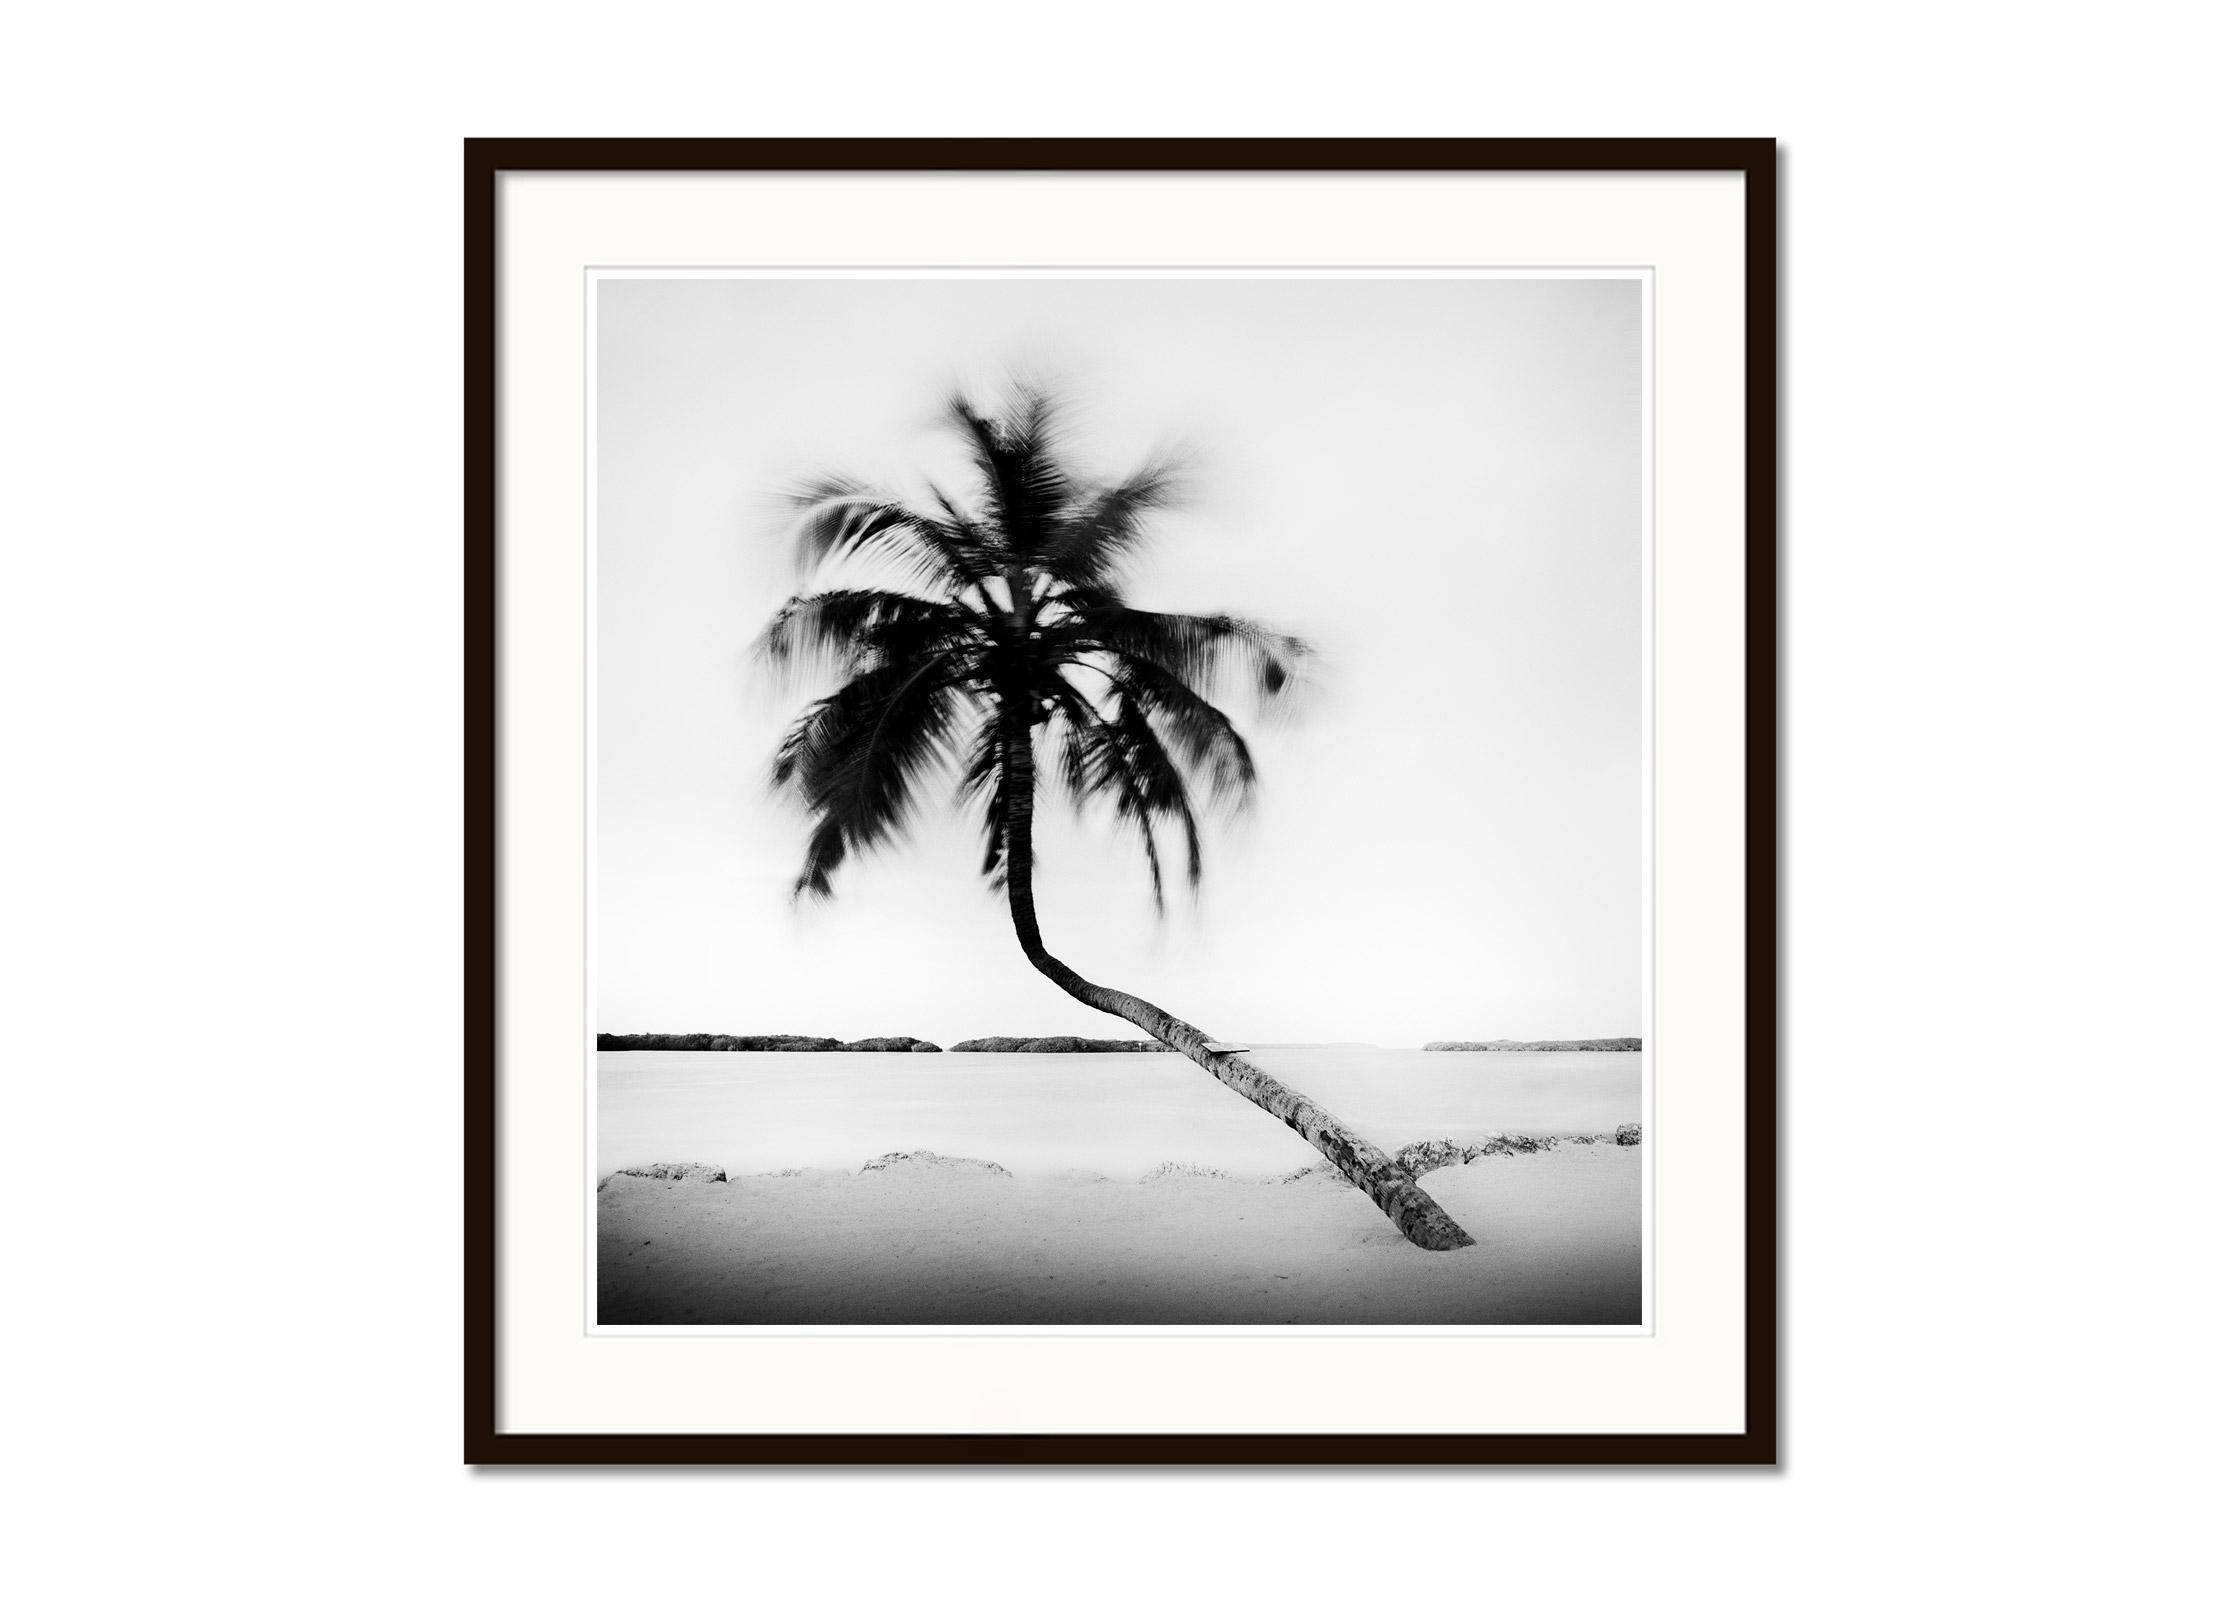 Bent Palm, Beach, Florida, USA, black and white fine art photography, landscape - Gray Black and White Photograph by Gerald Berghammer, Ina Forstinger